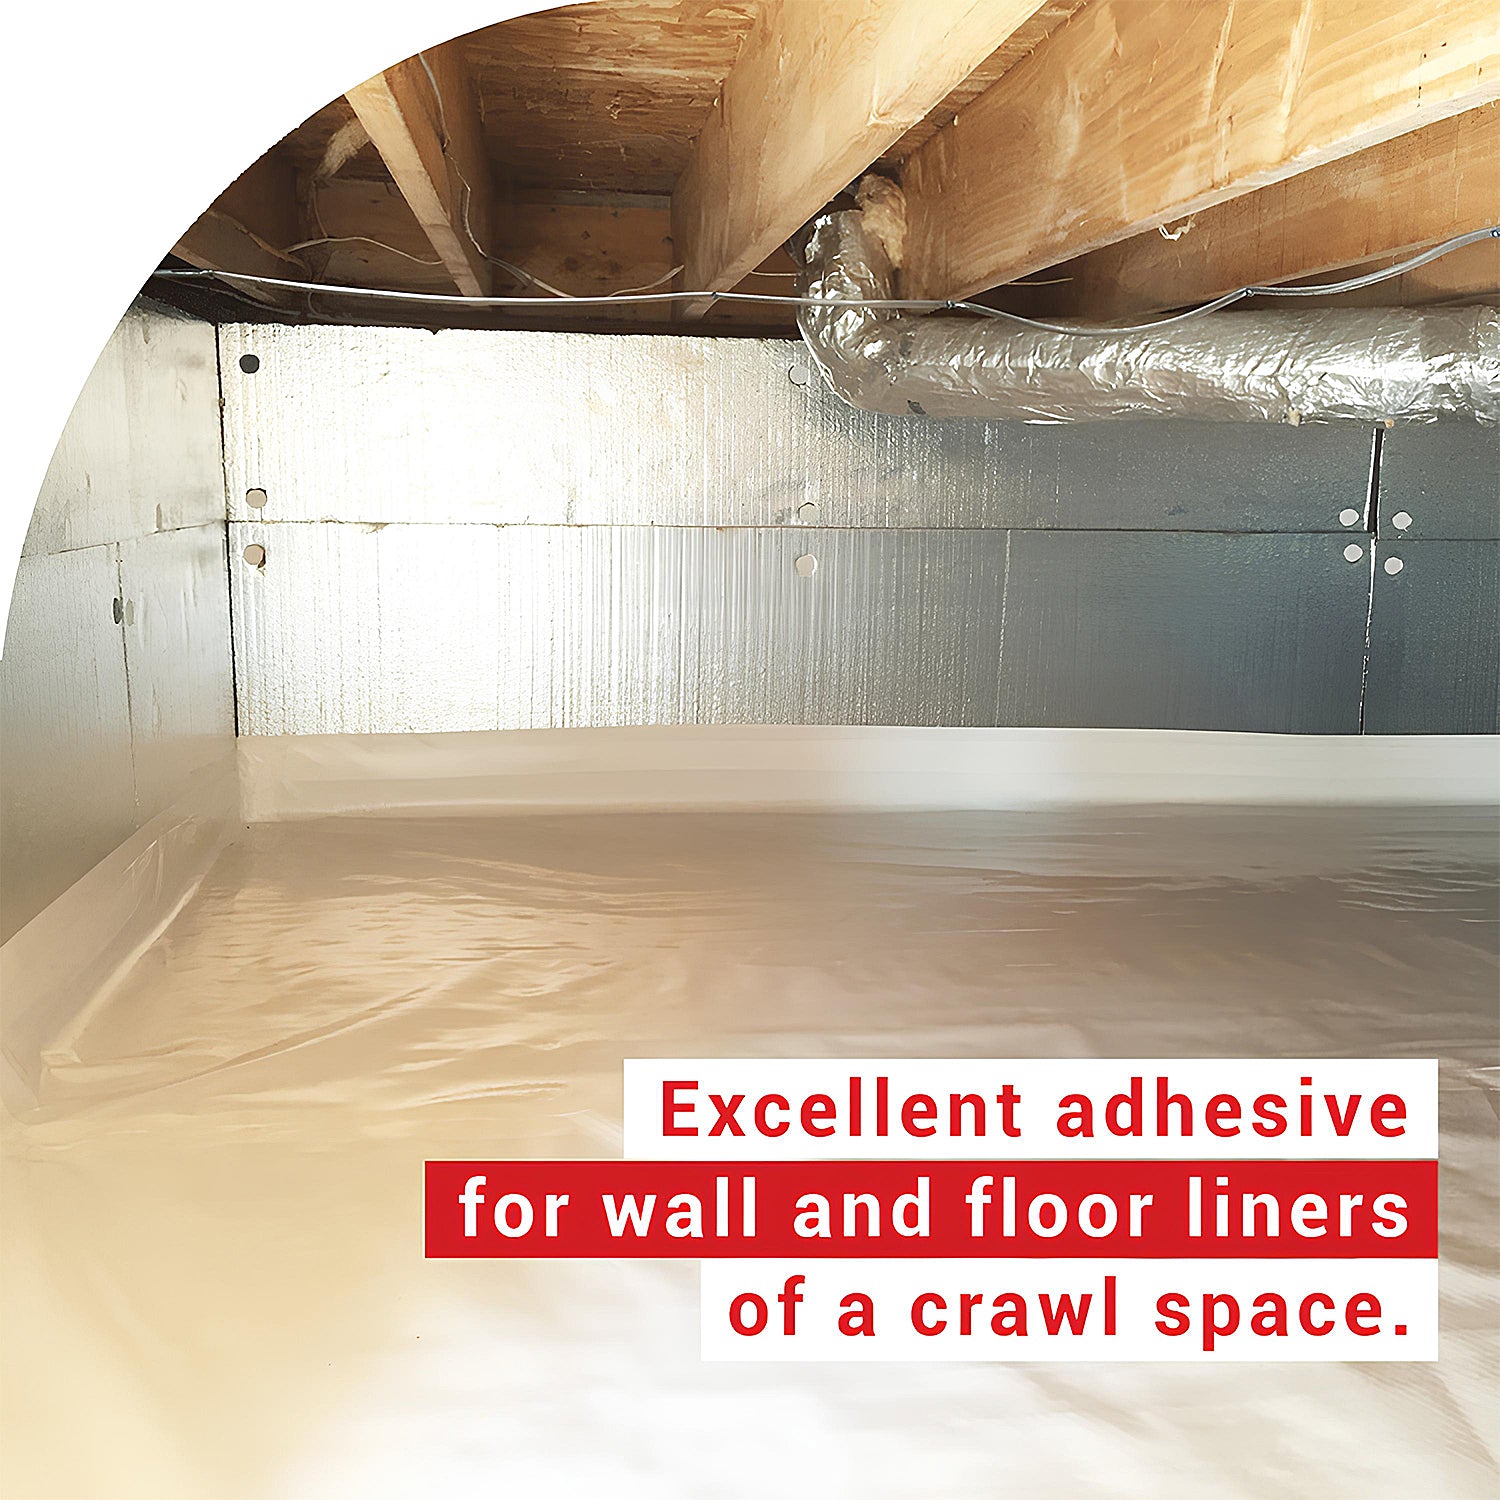 Excellent adhesive for wall and floor liners of a crawl space